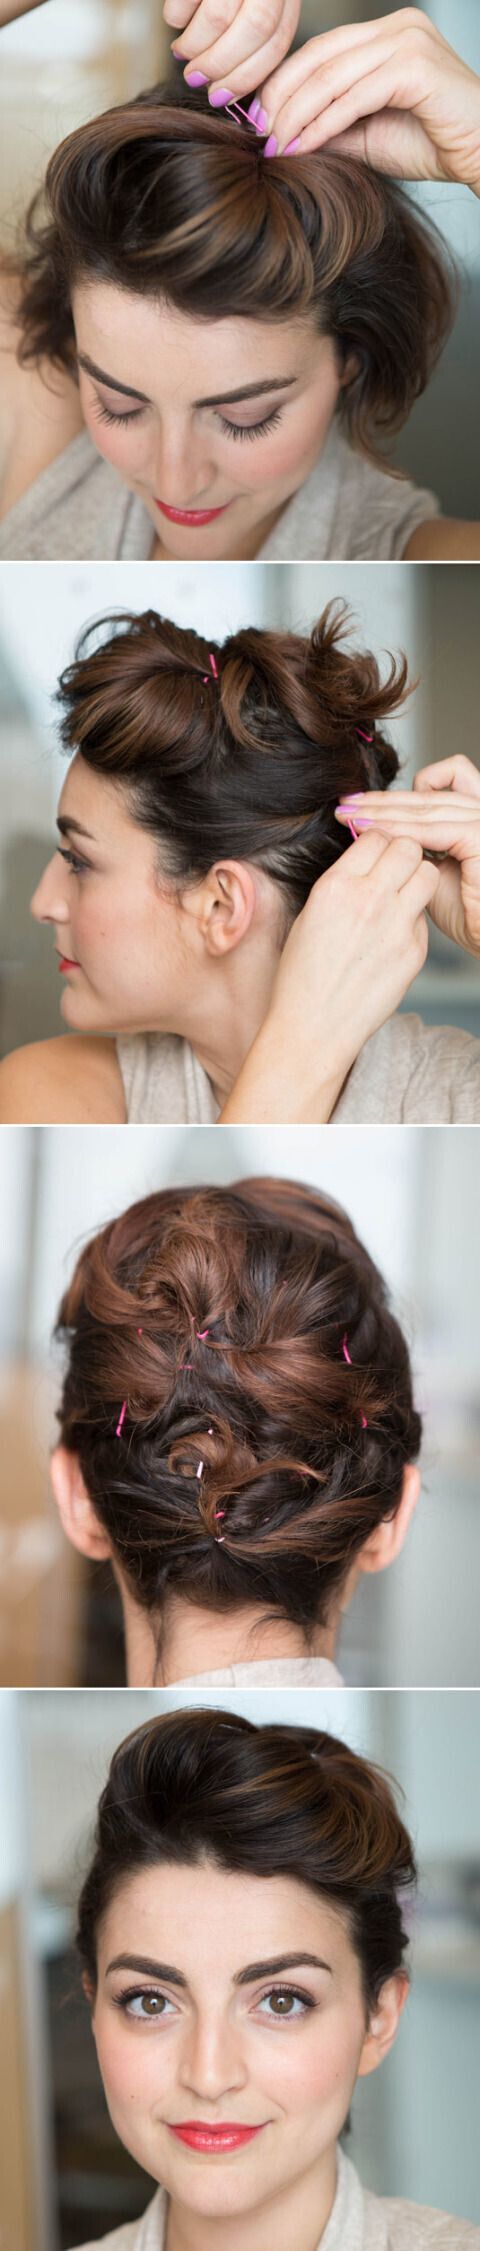 Updos Styling Ideas Just for Short Hair